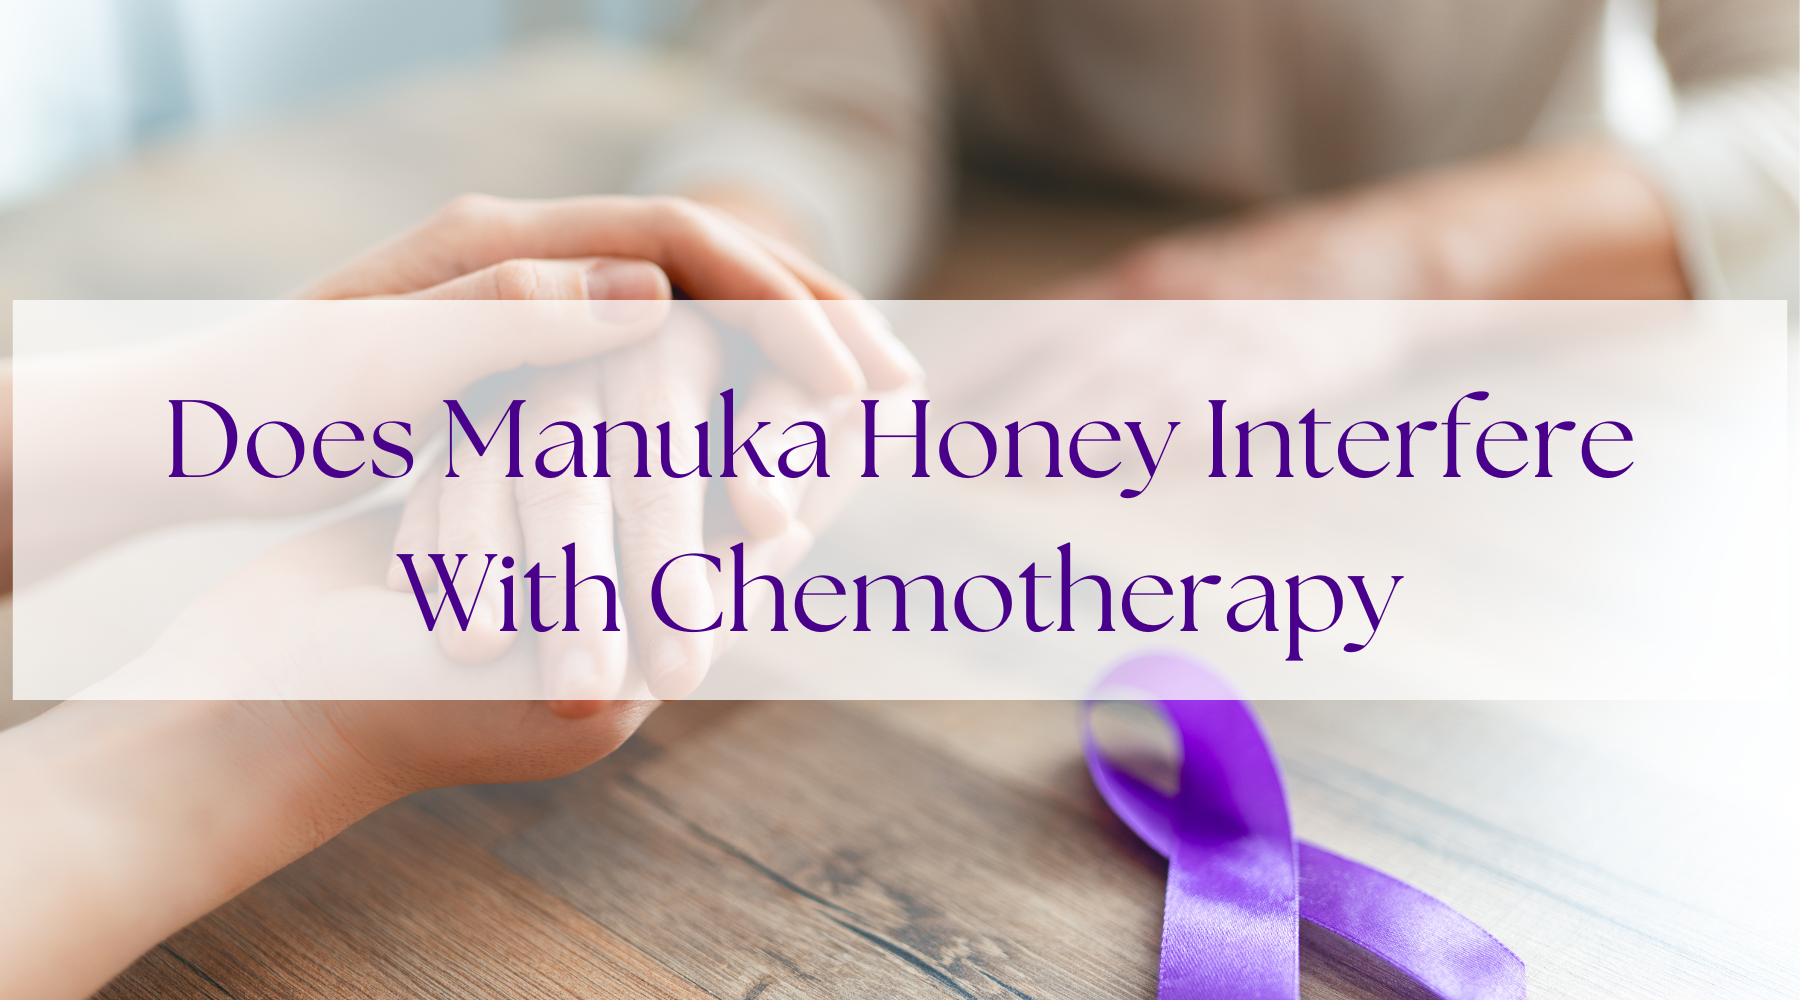 Does Manuka Honey Interfere With Chemotherapy